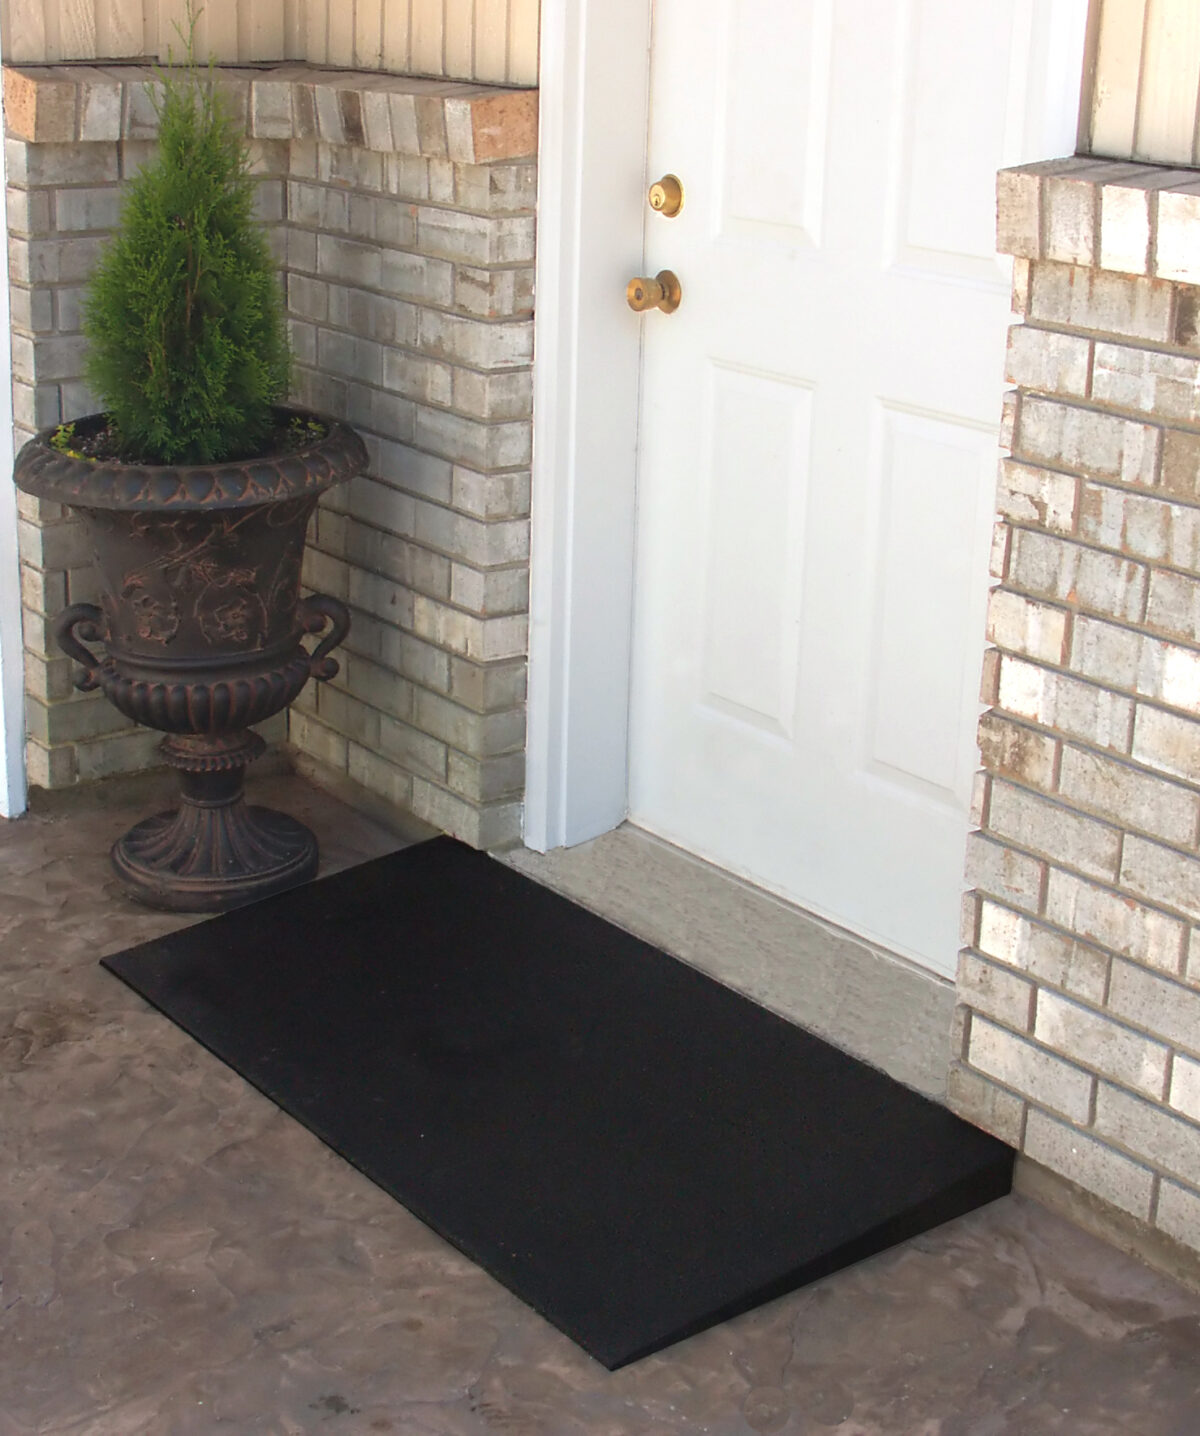 Black Transitions angled entry mat for entry